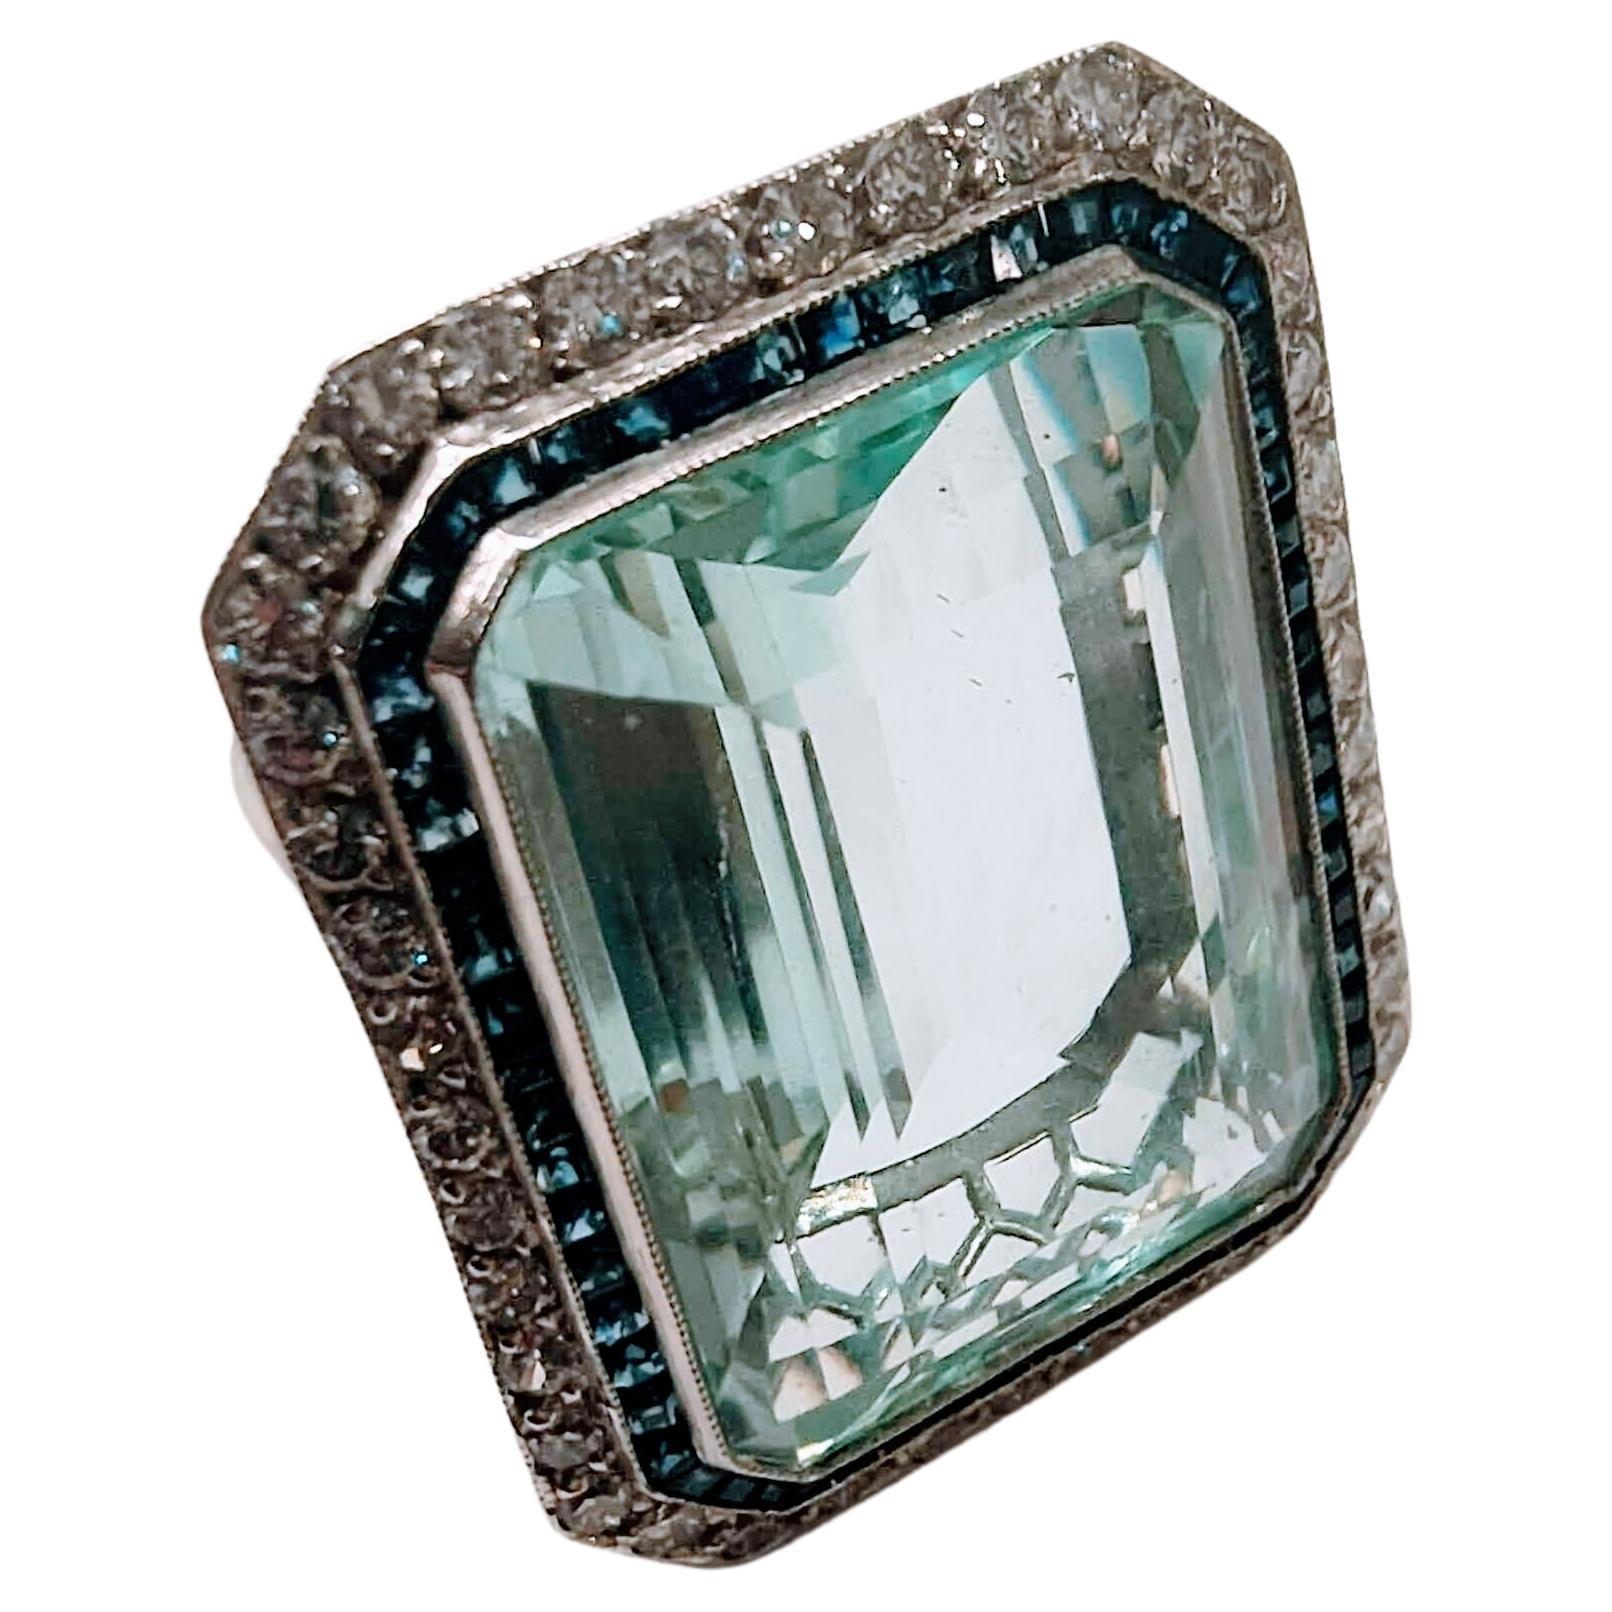 Important Art Deco ring made of platinum, weight 16.45 grams, octagonal base with delicate inclination and in its lower part beautiful openwork, body with eyelashes. Great Aquamarine in emerald cut of 30 carats, beautiful tone and excellent clarity.